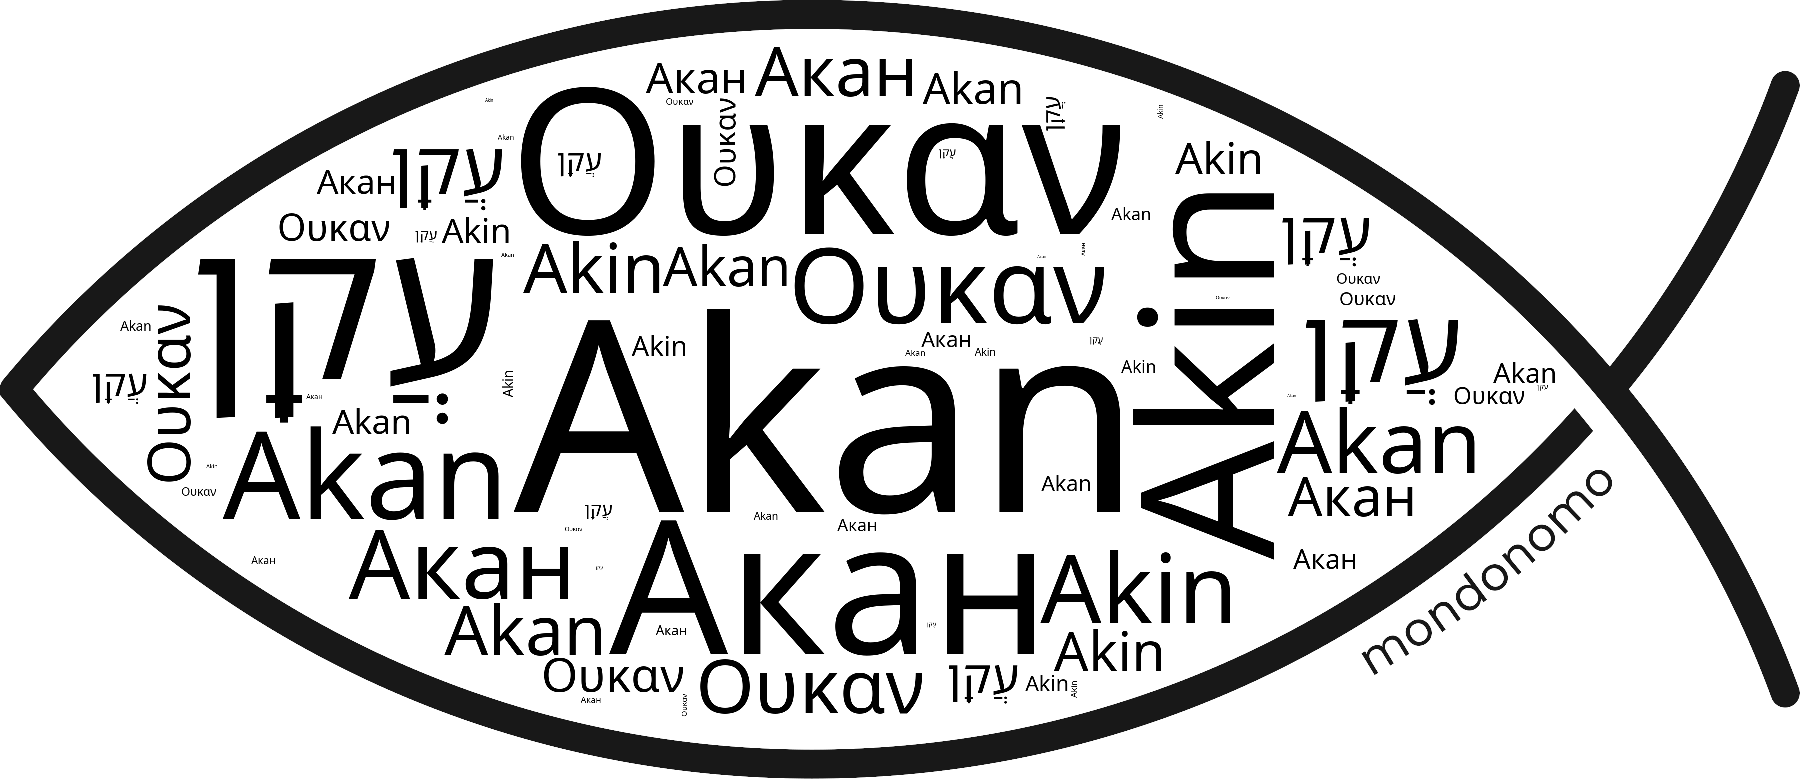 Name Akan in the world's Bibles